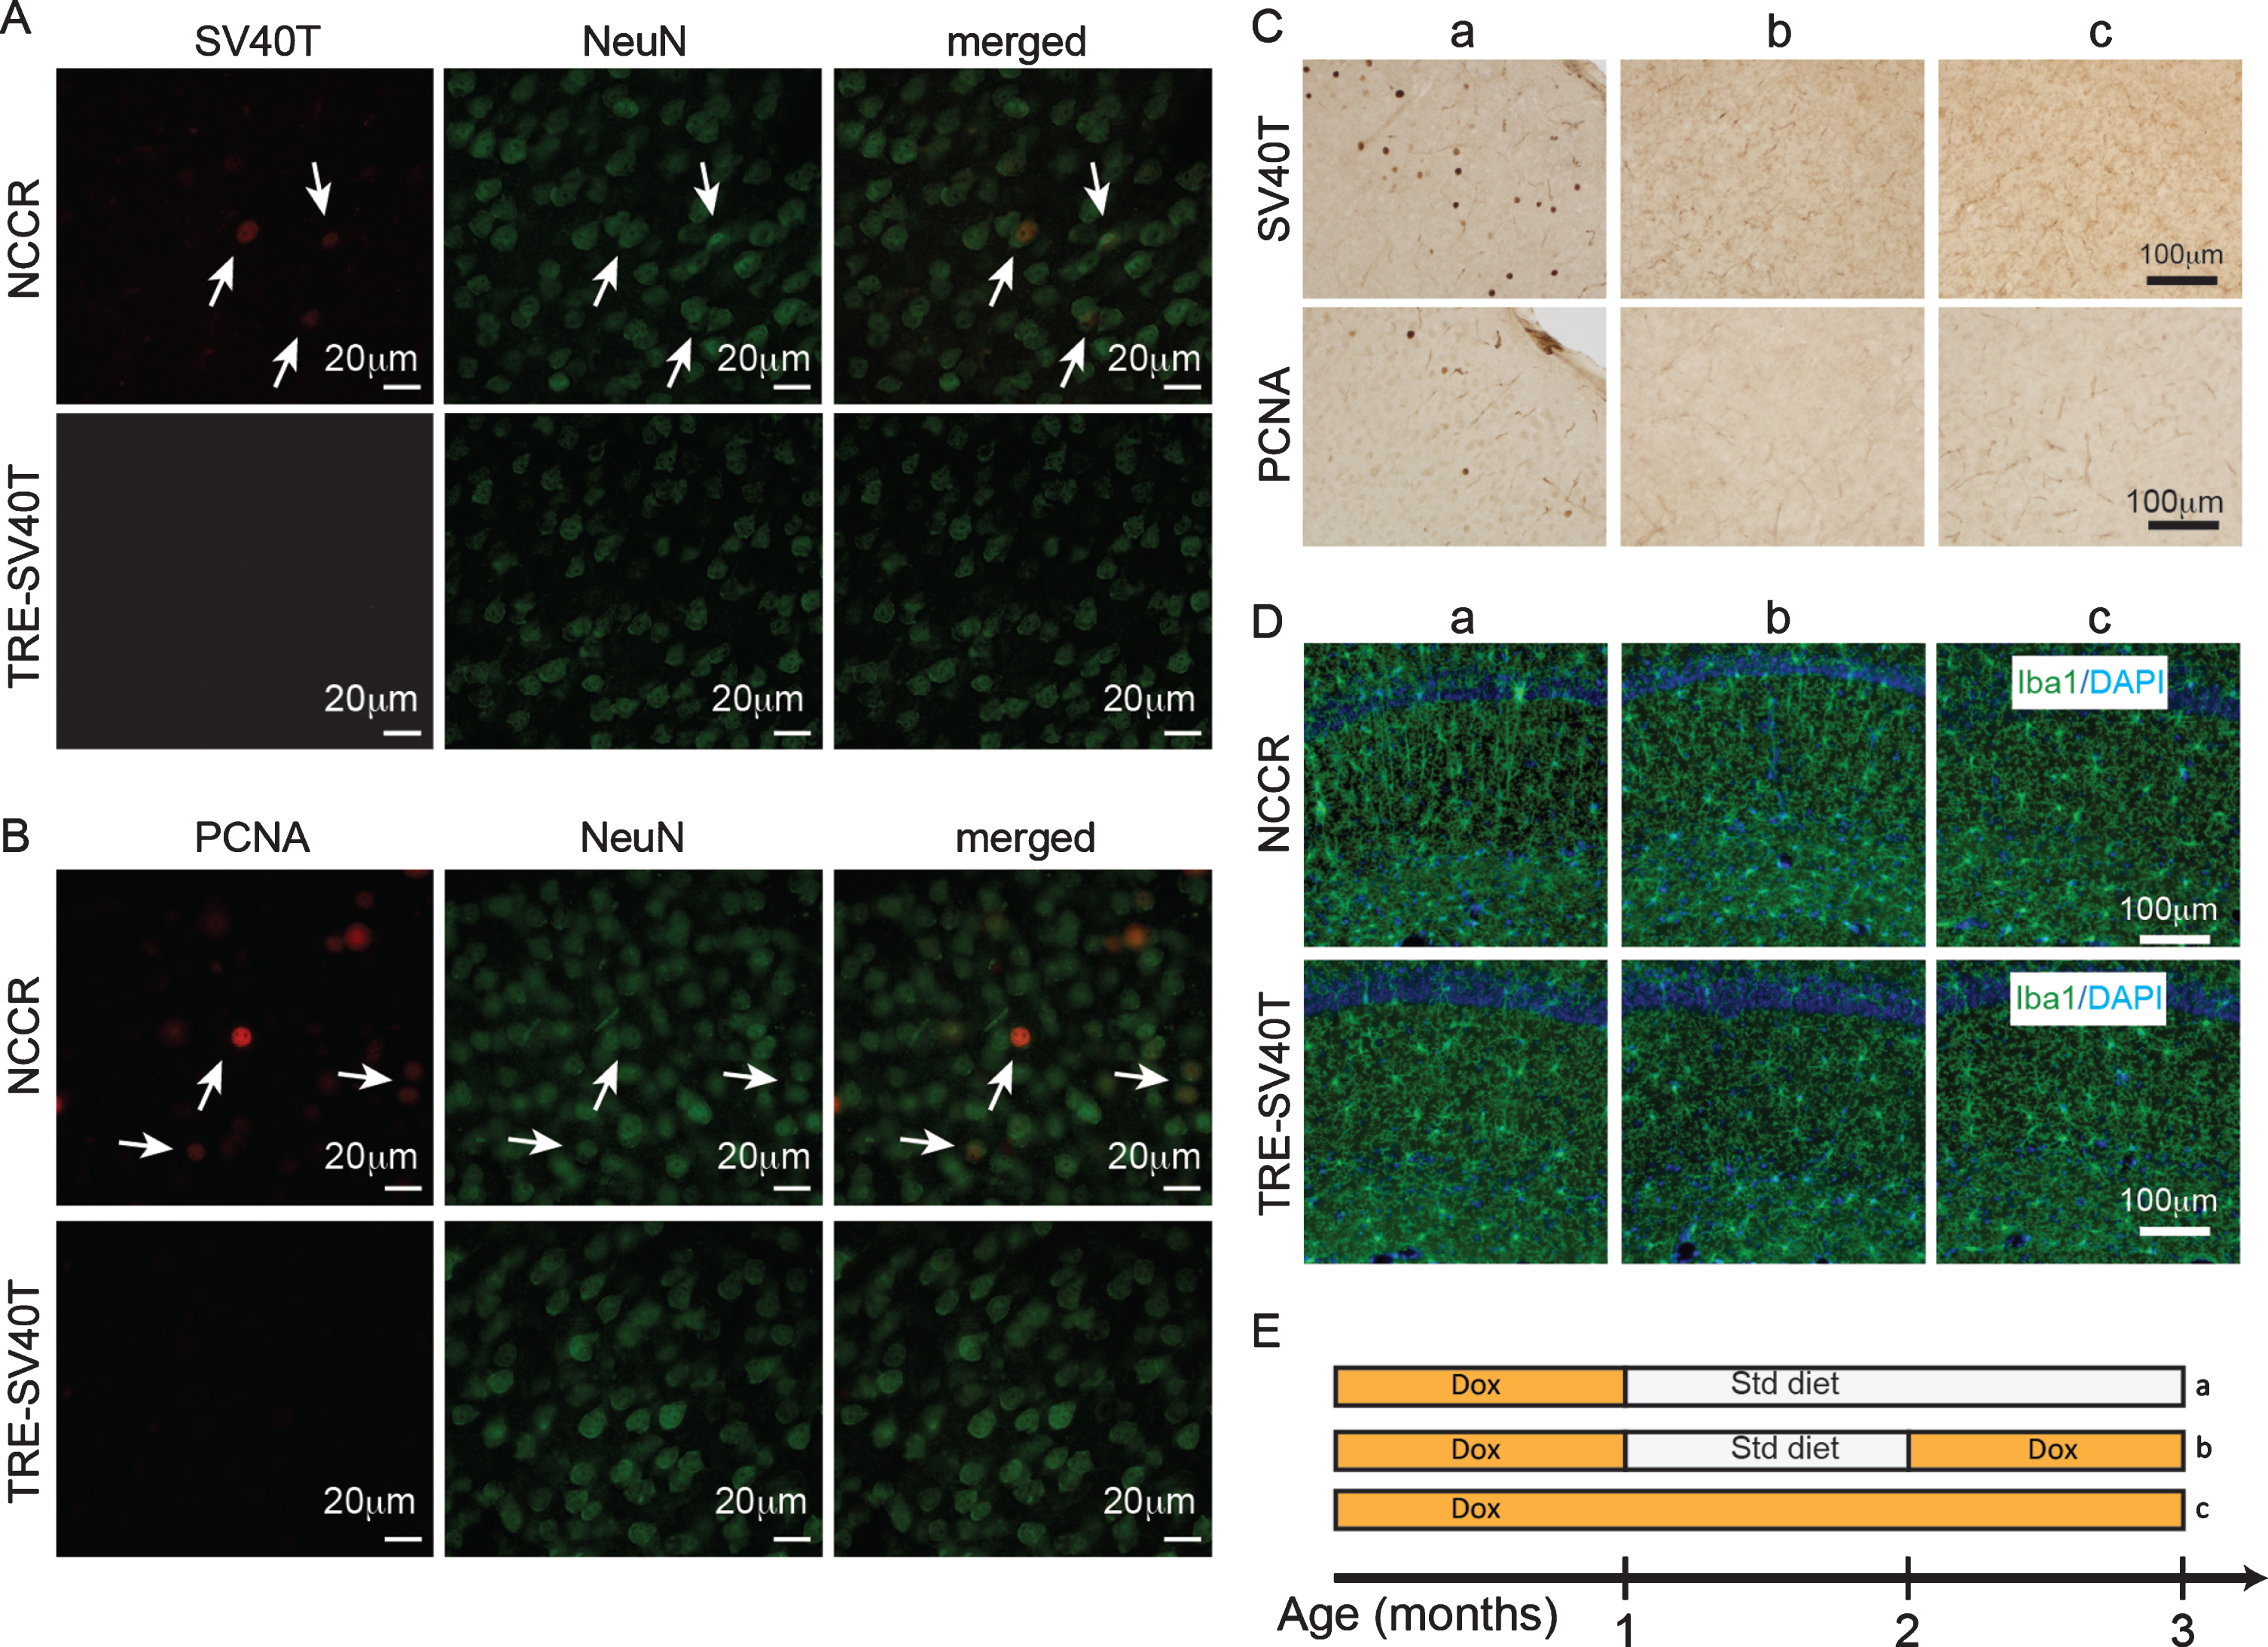 Forced neuronal cell cycle re-entry induces microglia activation. A) Immunofluorescence labeling shows SV40T and NeuN co-label (arrows) in 4-month-old NCCR mice (n = 4). TAg control animals (n = 4) do not show SV40T immunofluorescence. B) Immunofluorescence labeling shows PCNA and NeuN co-label (arrows) in 4-month-old NCCR mice (n = 4). TAg control animals (n = 4) do not show PCNA immunofluorescence. C, a) NCCR animals (n = 3) maintained on standard (Std) diet starting at 1 month of age and examined at 3 months of age show persistent expression of SV40T and PCNA (marker of cell cycle activation) in the cortex (shown) and hippocampus (data not shown). C, b) The SV40T expression is tightly regulated by dox diet in the NCCR mice. SV40T and PCNA stains are absent in a separate group of NCCR mice (n = 3) that are put back on dox diet at 2 months of age and examined at 3 months of age. C, c) The NCCR animals that are continuously maintained on dox diet (n = 3) do not show any SV40T or PCNA stains. D, a) The same animals in Ca show Iba-1 labeled rod-like activated microglia in the hippocampus. TAg control animals maintained in the same diet regimen do not show rod-like microglia. D, b) The rod-like microglia in the NCCR animals become morphologically less pronounced in the hippocampus when they are put back on dox diet for 1 month. D, c) When the NCCR animals are always maintained on dox diet (SV40T is chronically turned off), the microglia display morphological features and distribution patterns typical of resting microglia that are similar to TAg control animals (TRE-SV40T) under different diet treatment conditions. E) Schematic showing the different diet treatments used in the experiment. Lower case letters next to the treatment conditions correspond to the lower case letters shown in the image panels in C and D. Scale bar = 100 μm.